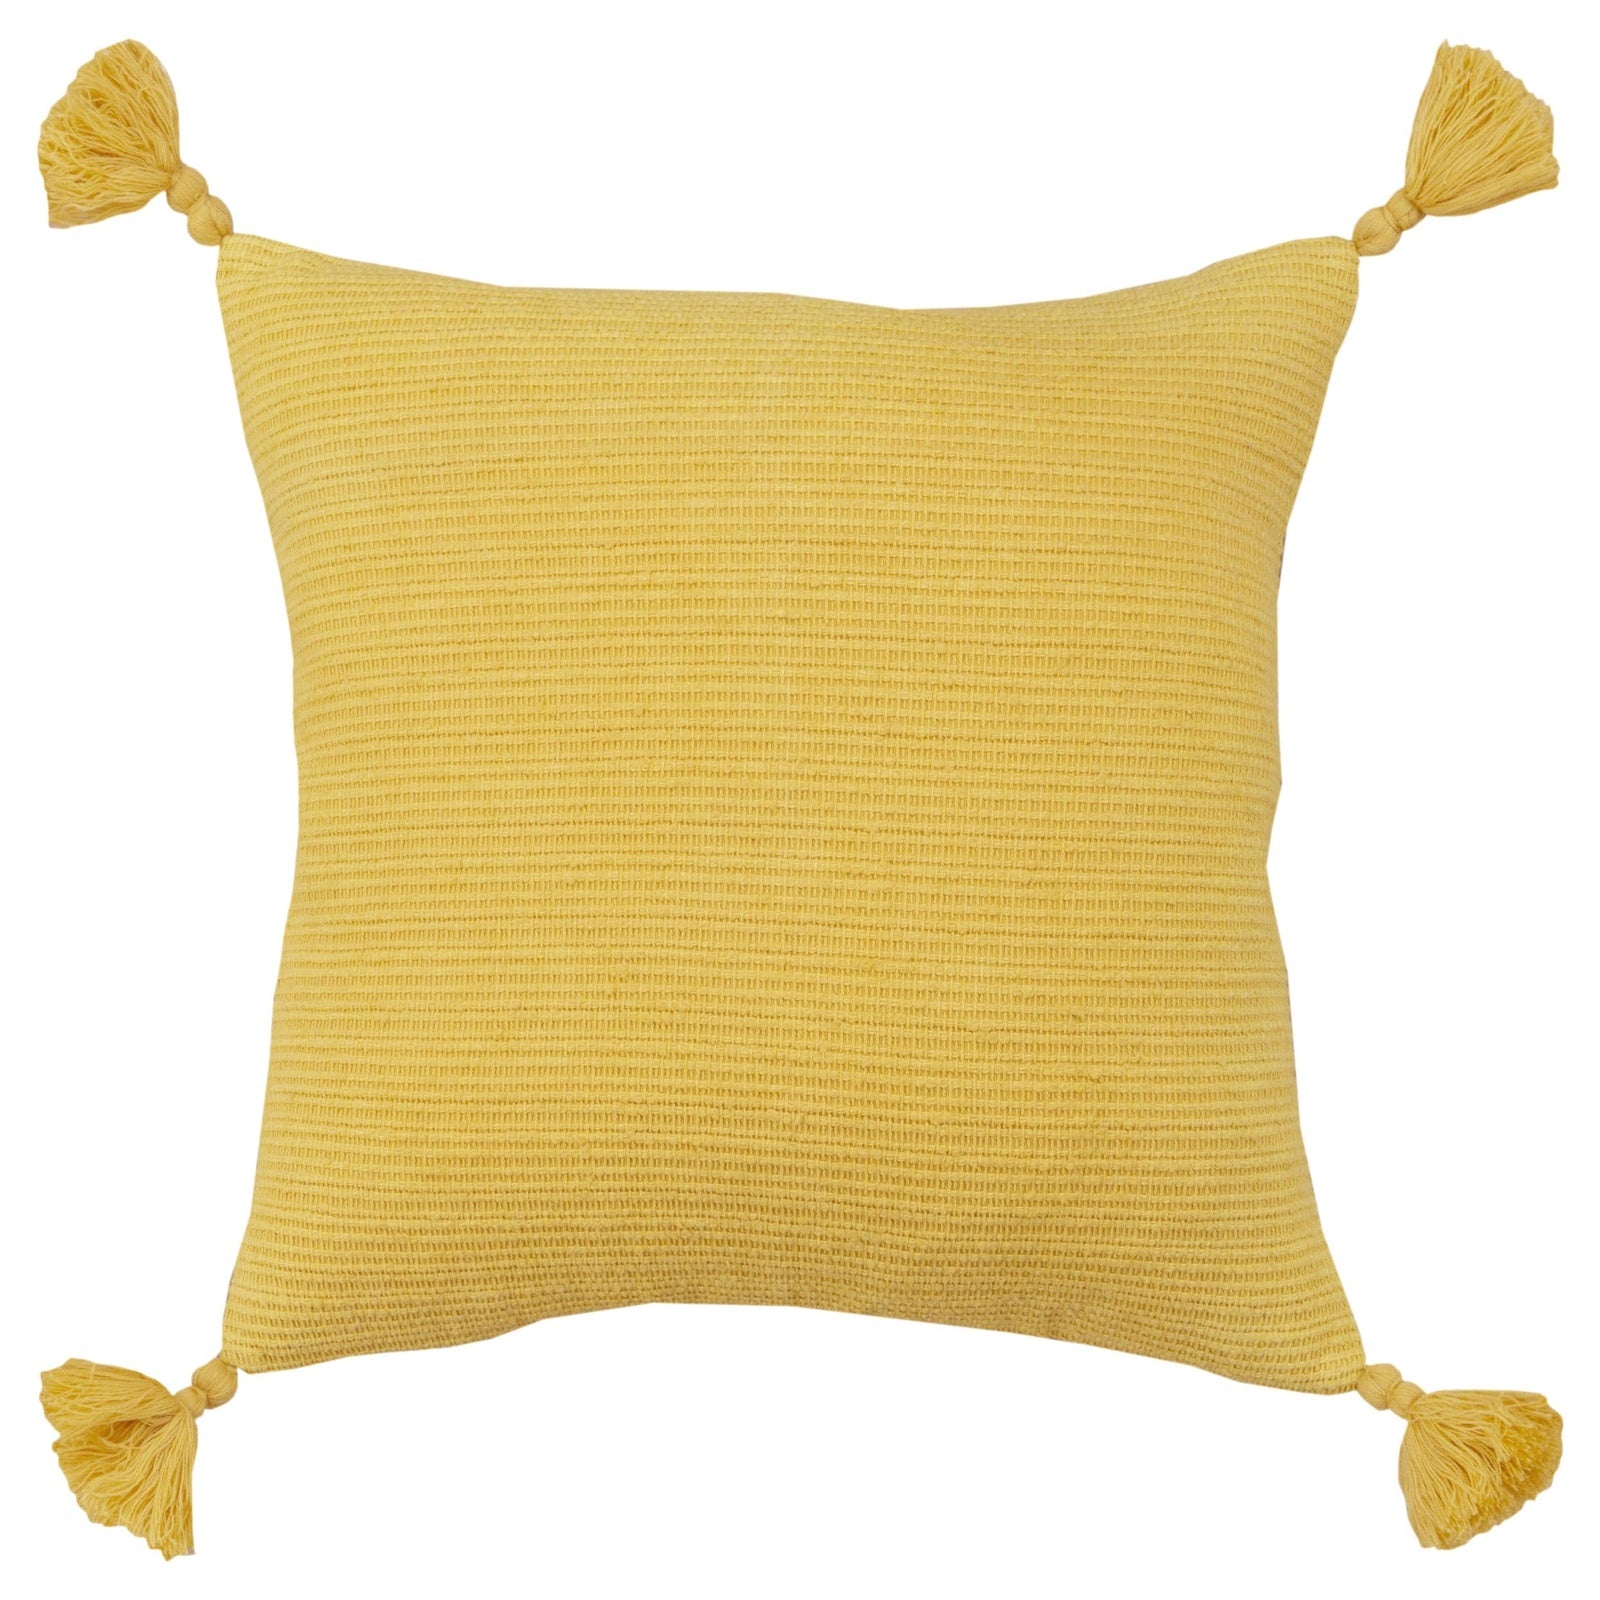 Knife Edged Woven Cotton Solid Stripe Decorative Throw Pillow - Decorative Pillows